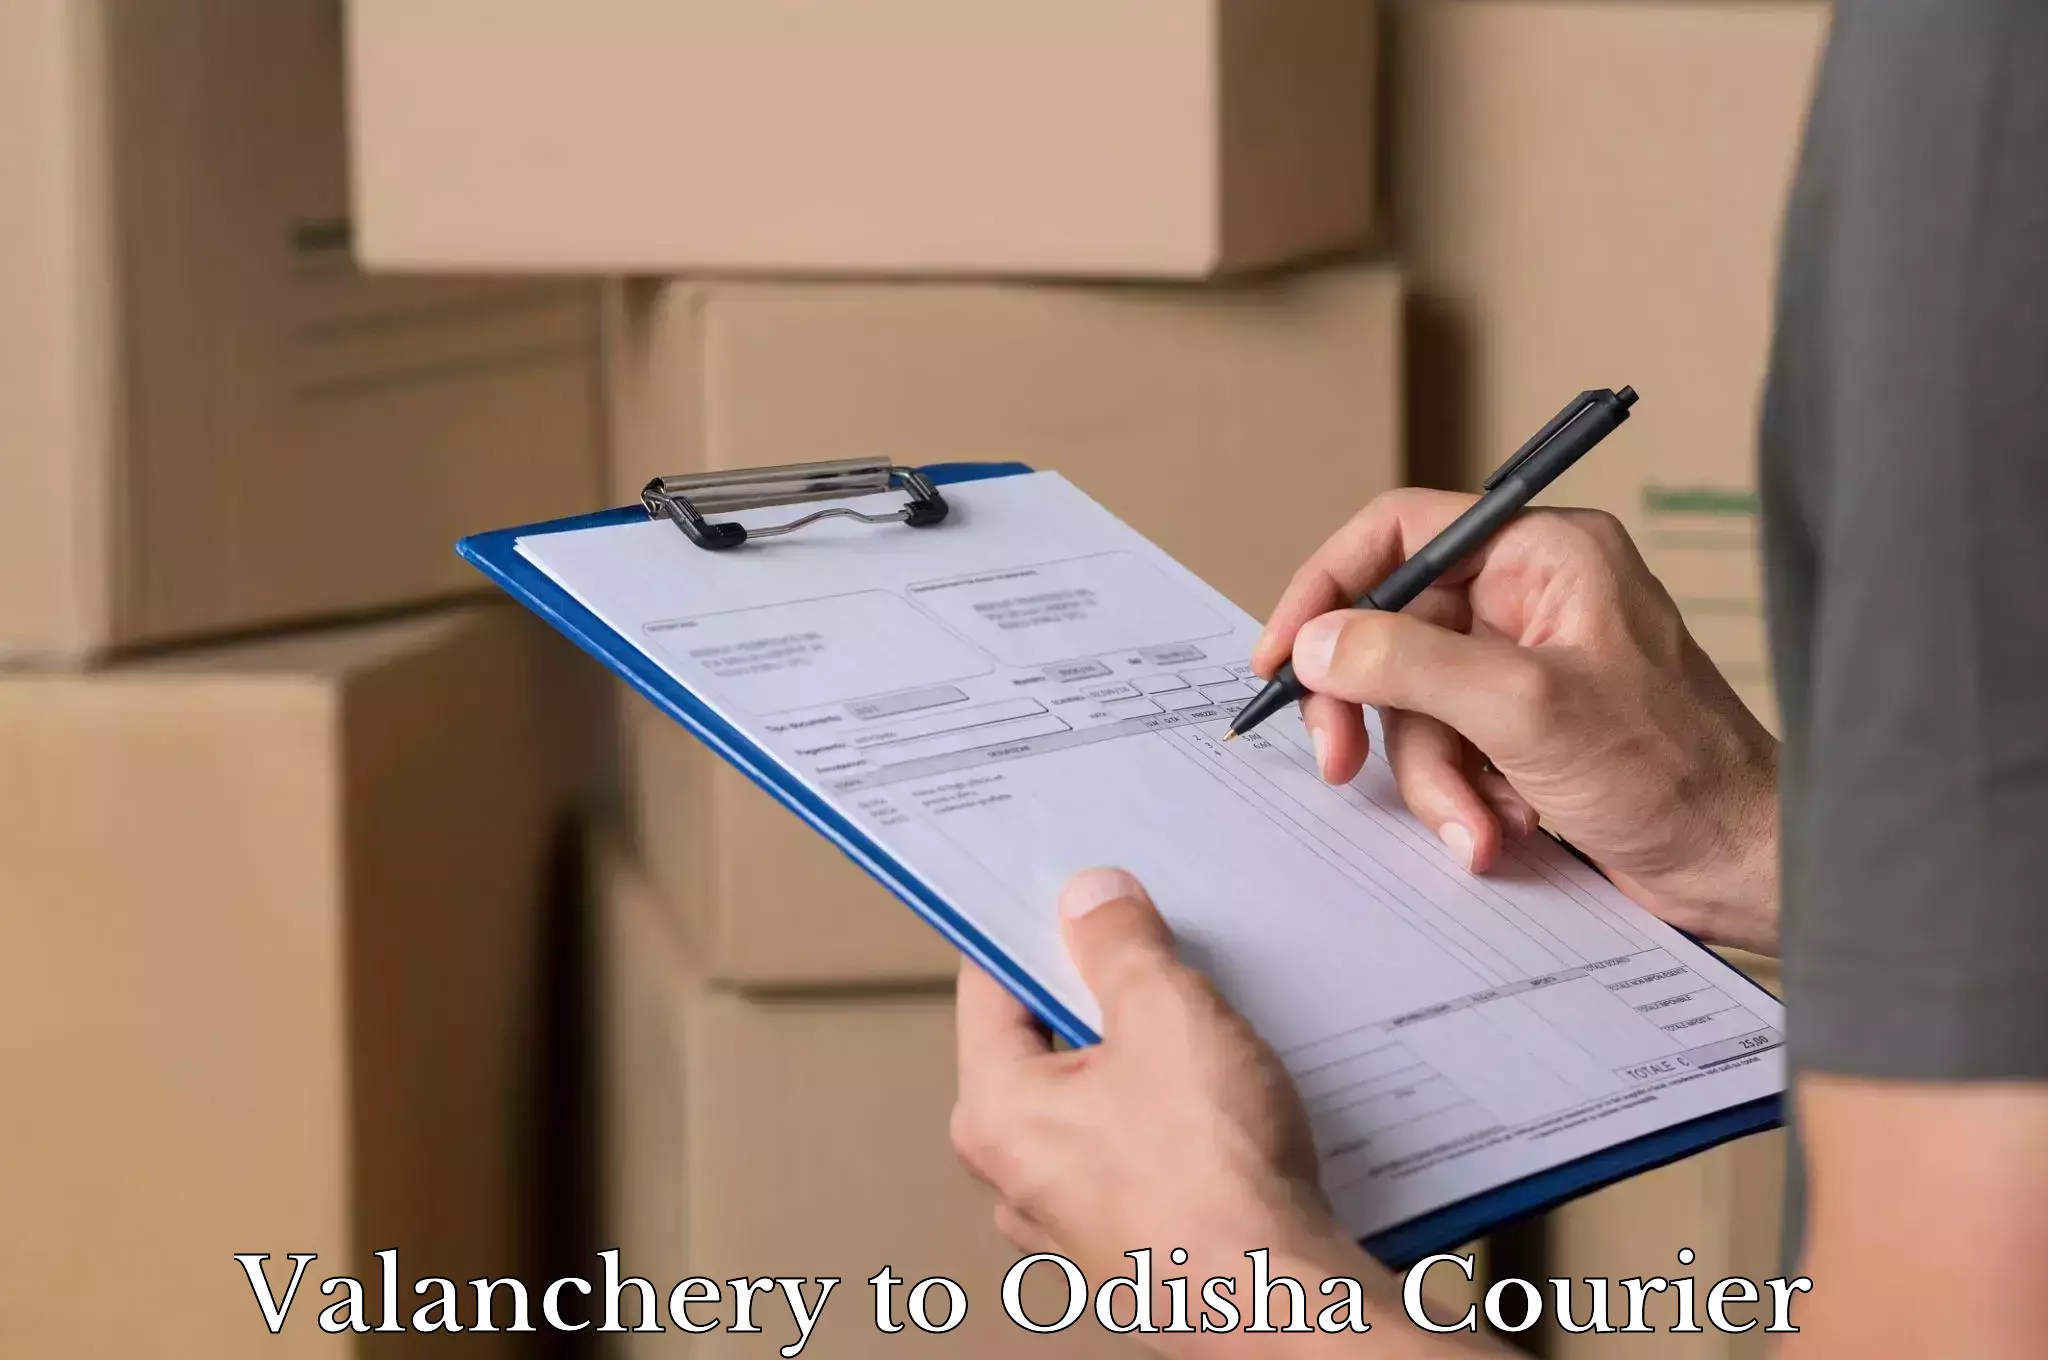 Online luggage shipping booking Valanchery to Odisha